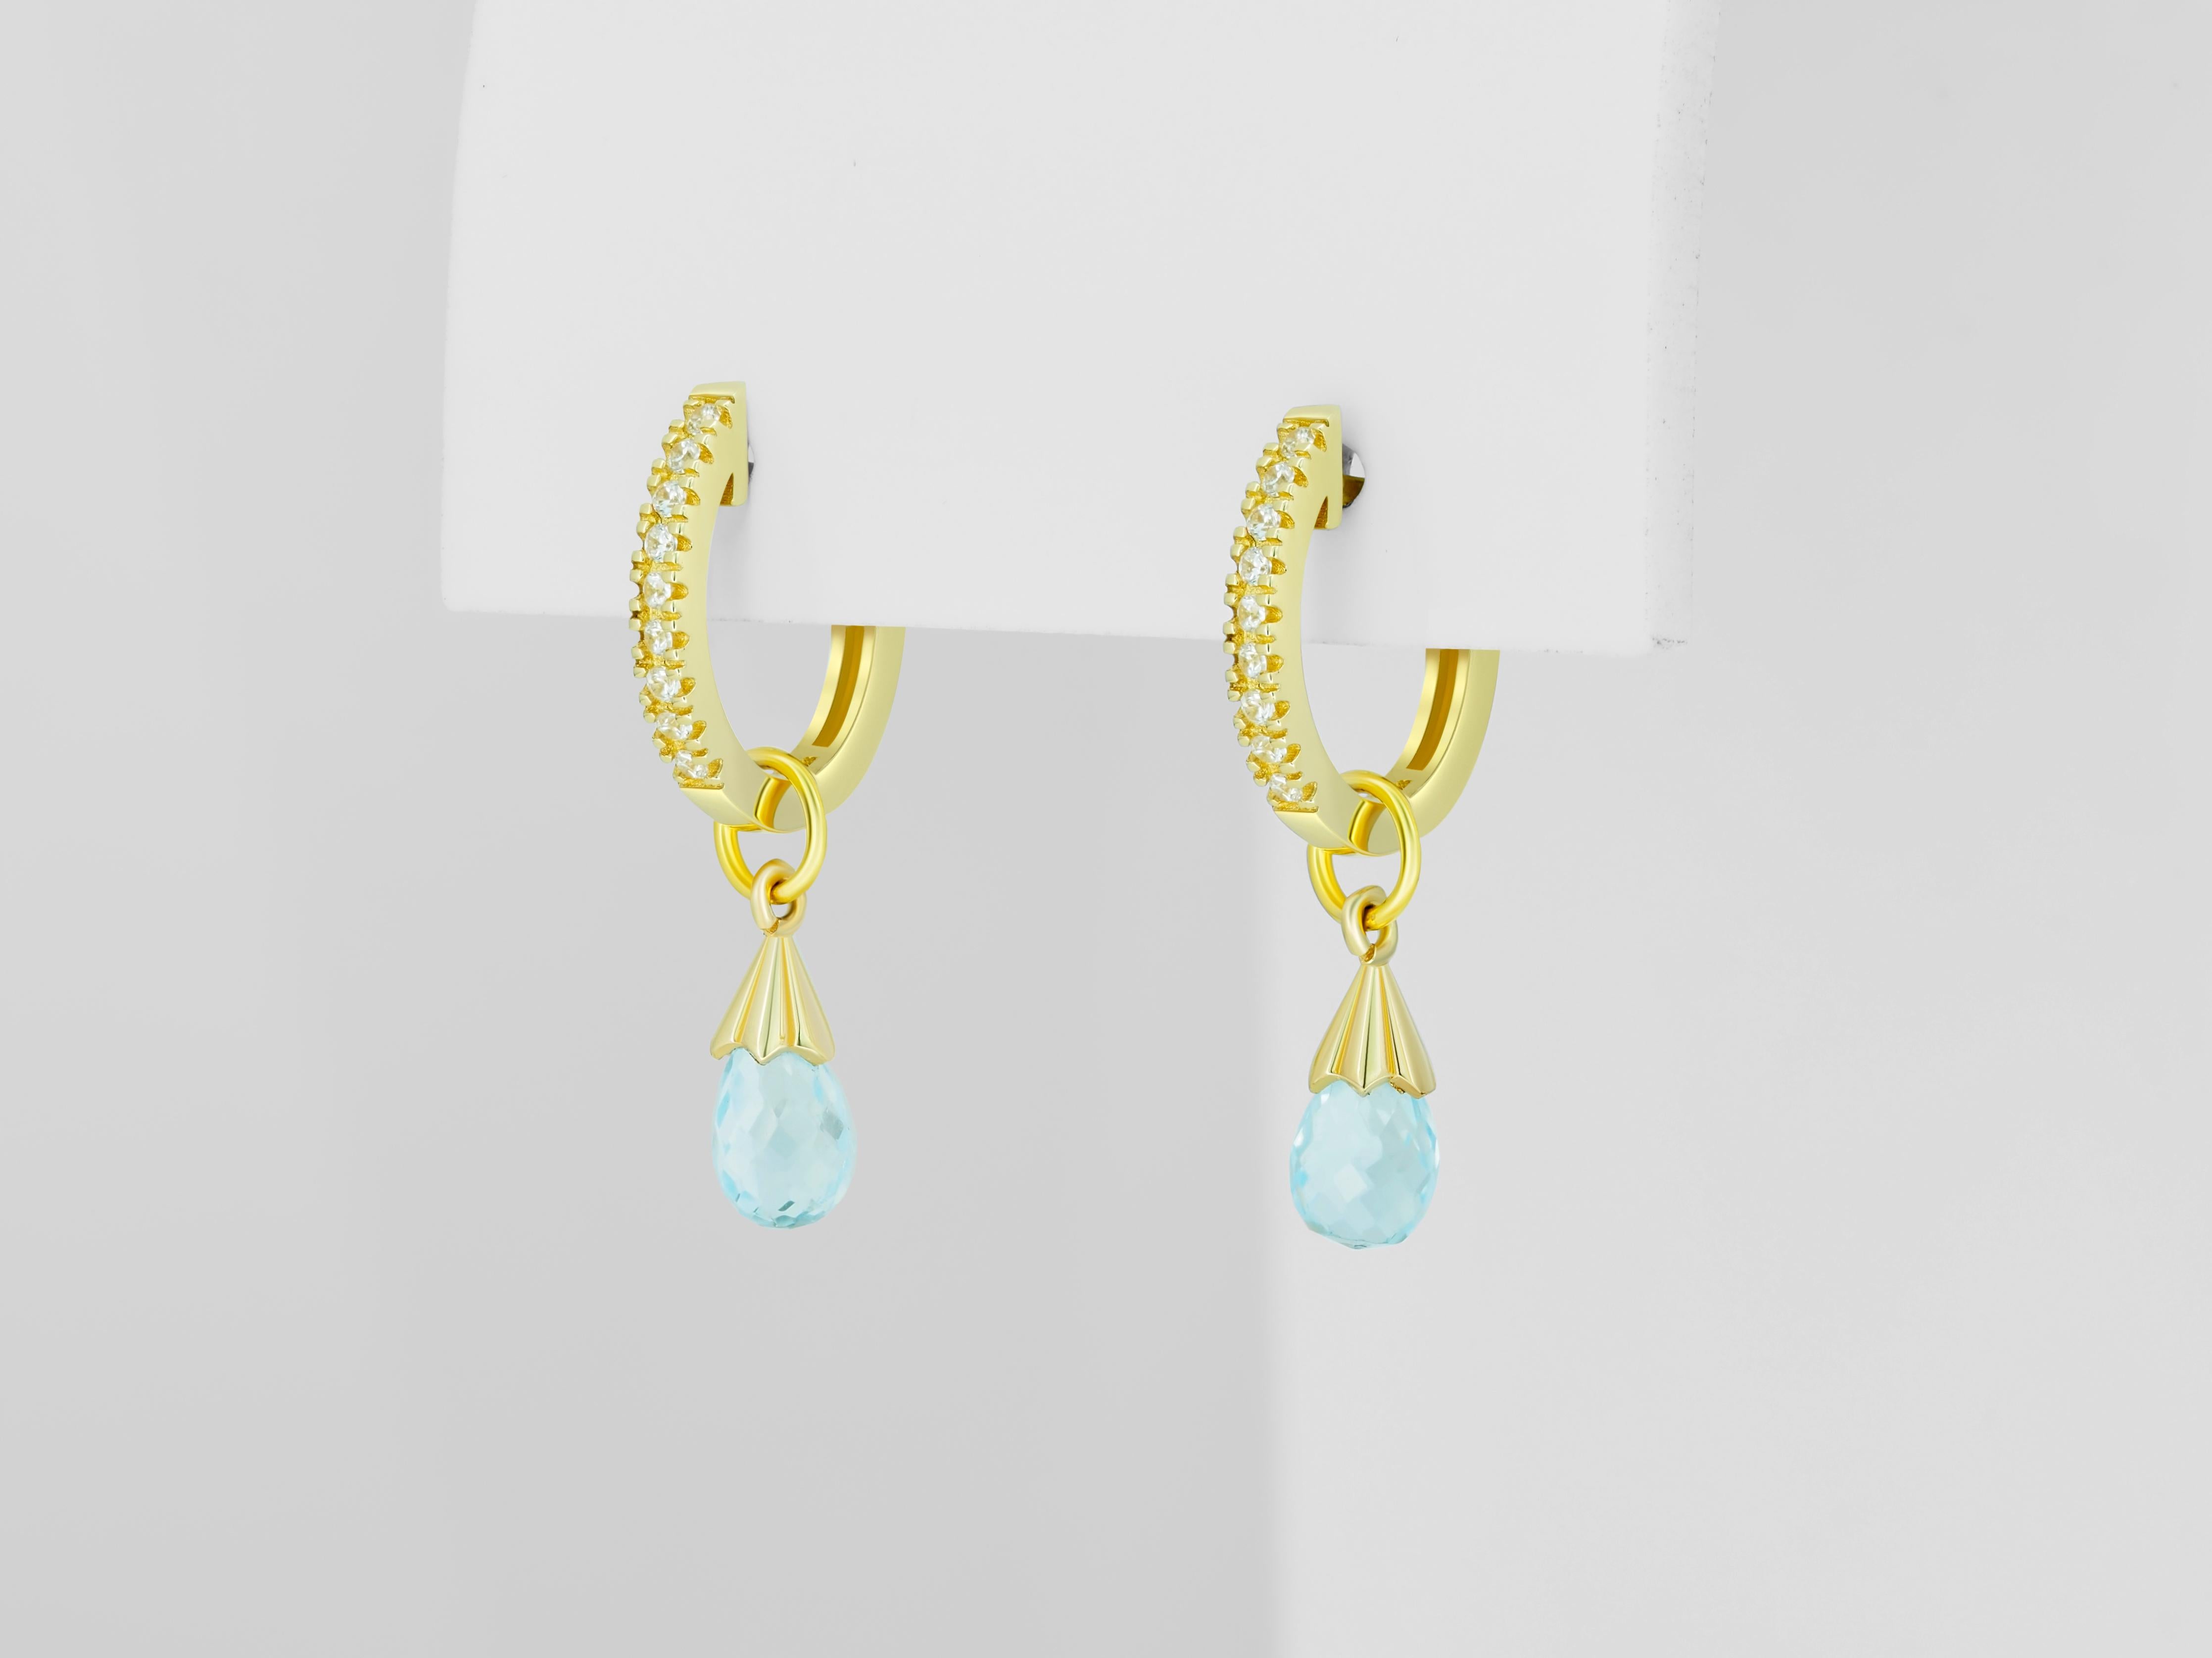 Hoop Earrings and Topaz Briolette Charms in 14k Gold For Sale 1